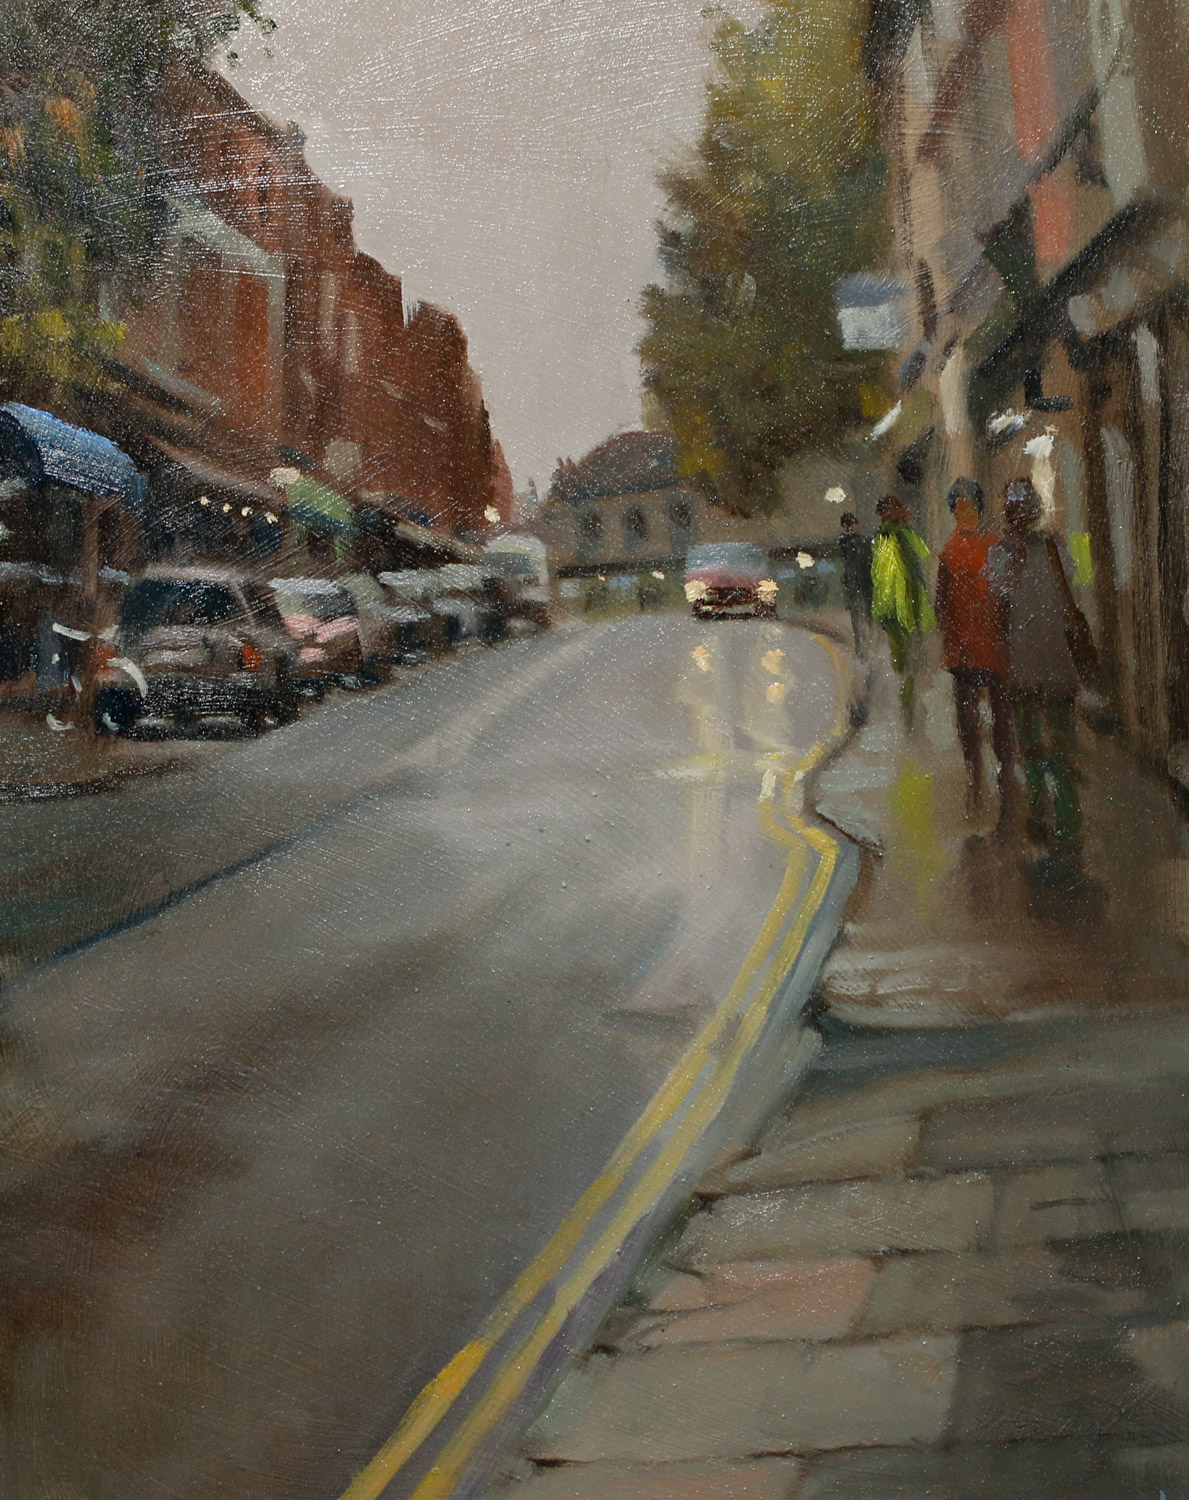 Artist Michael Richardson - Damp Afternoon, St Benedict Street 12x16 Oil on Board at Paint Out Norwich 2015